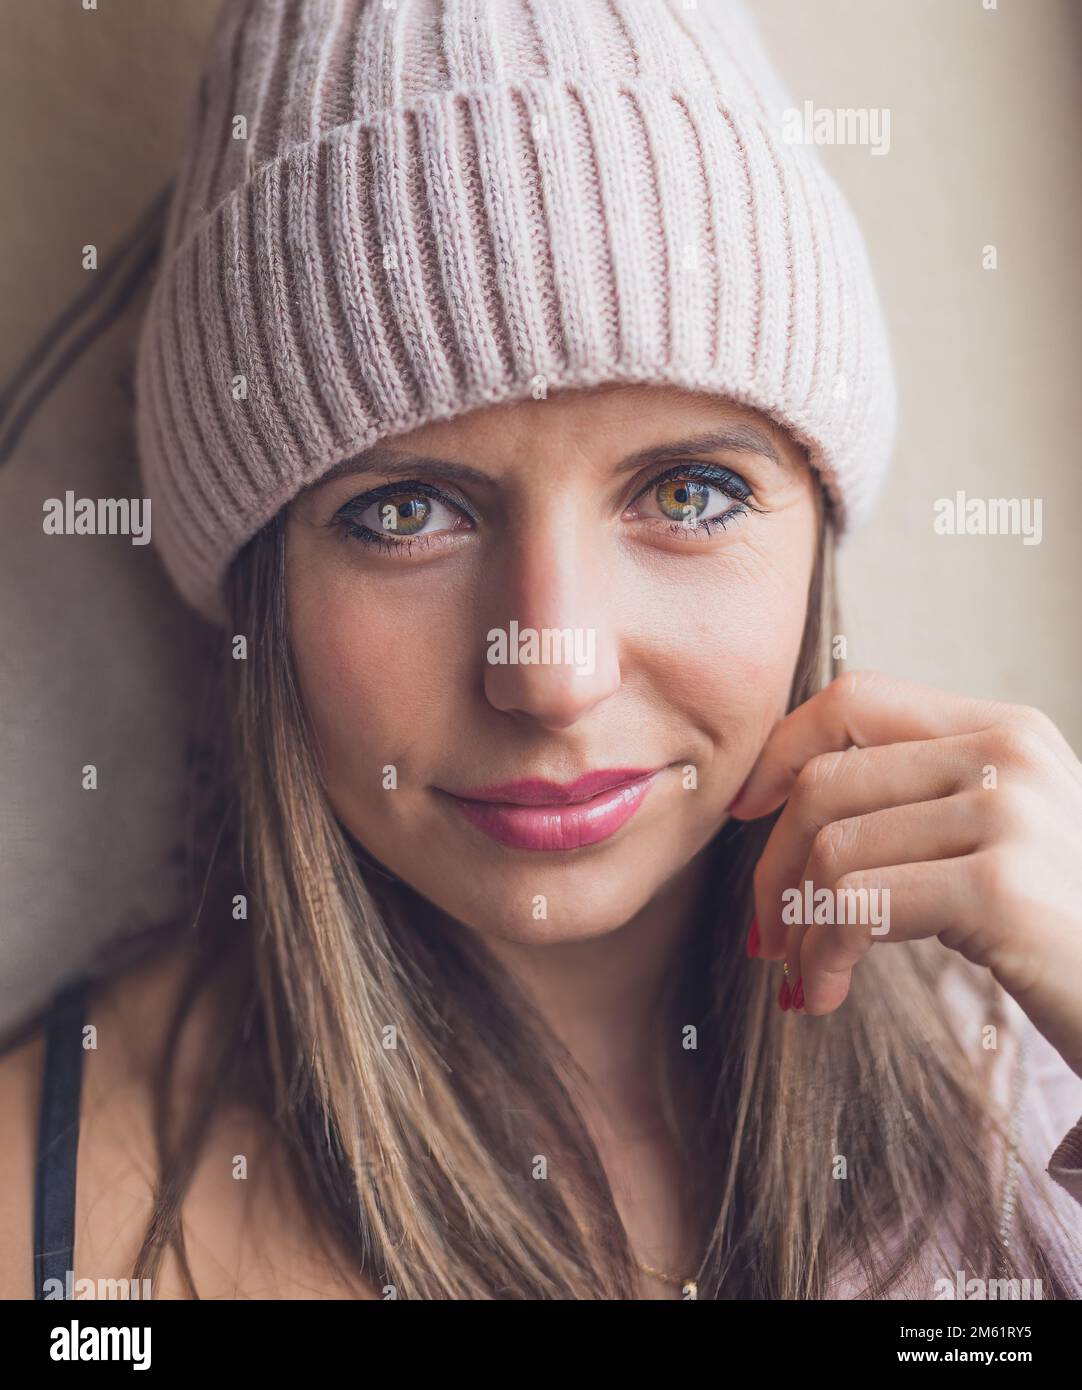 portrait of a Caucasian woman wearing a woolen cap and smiling. Looking at camera. natural light. Stock Photo